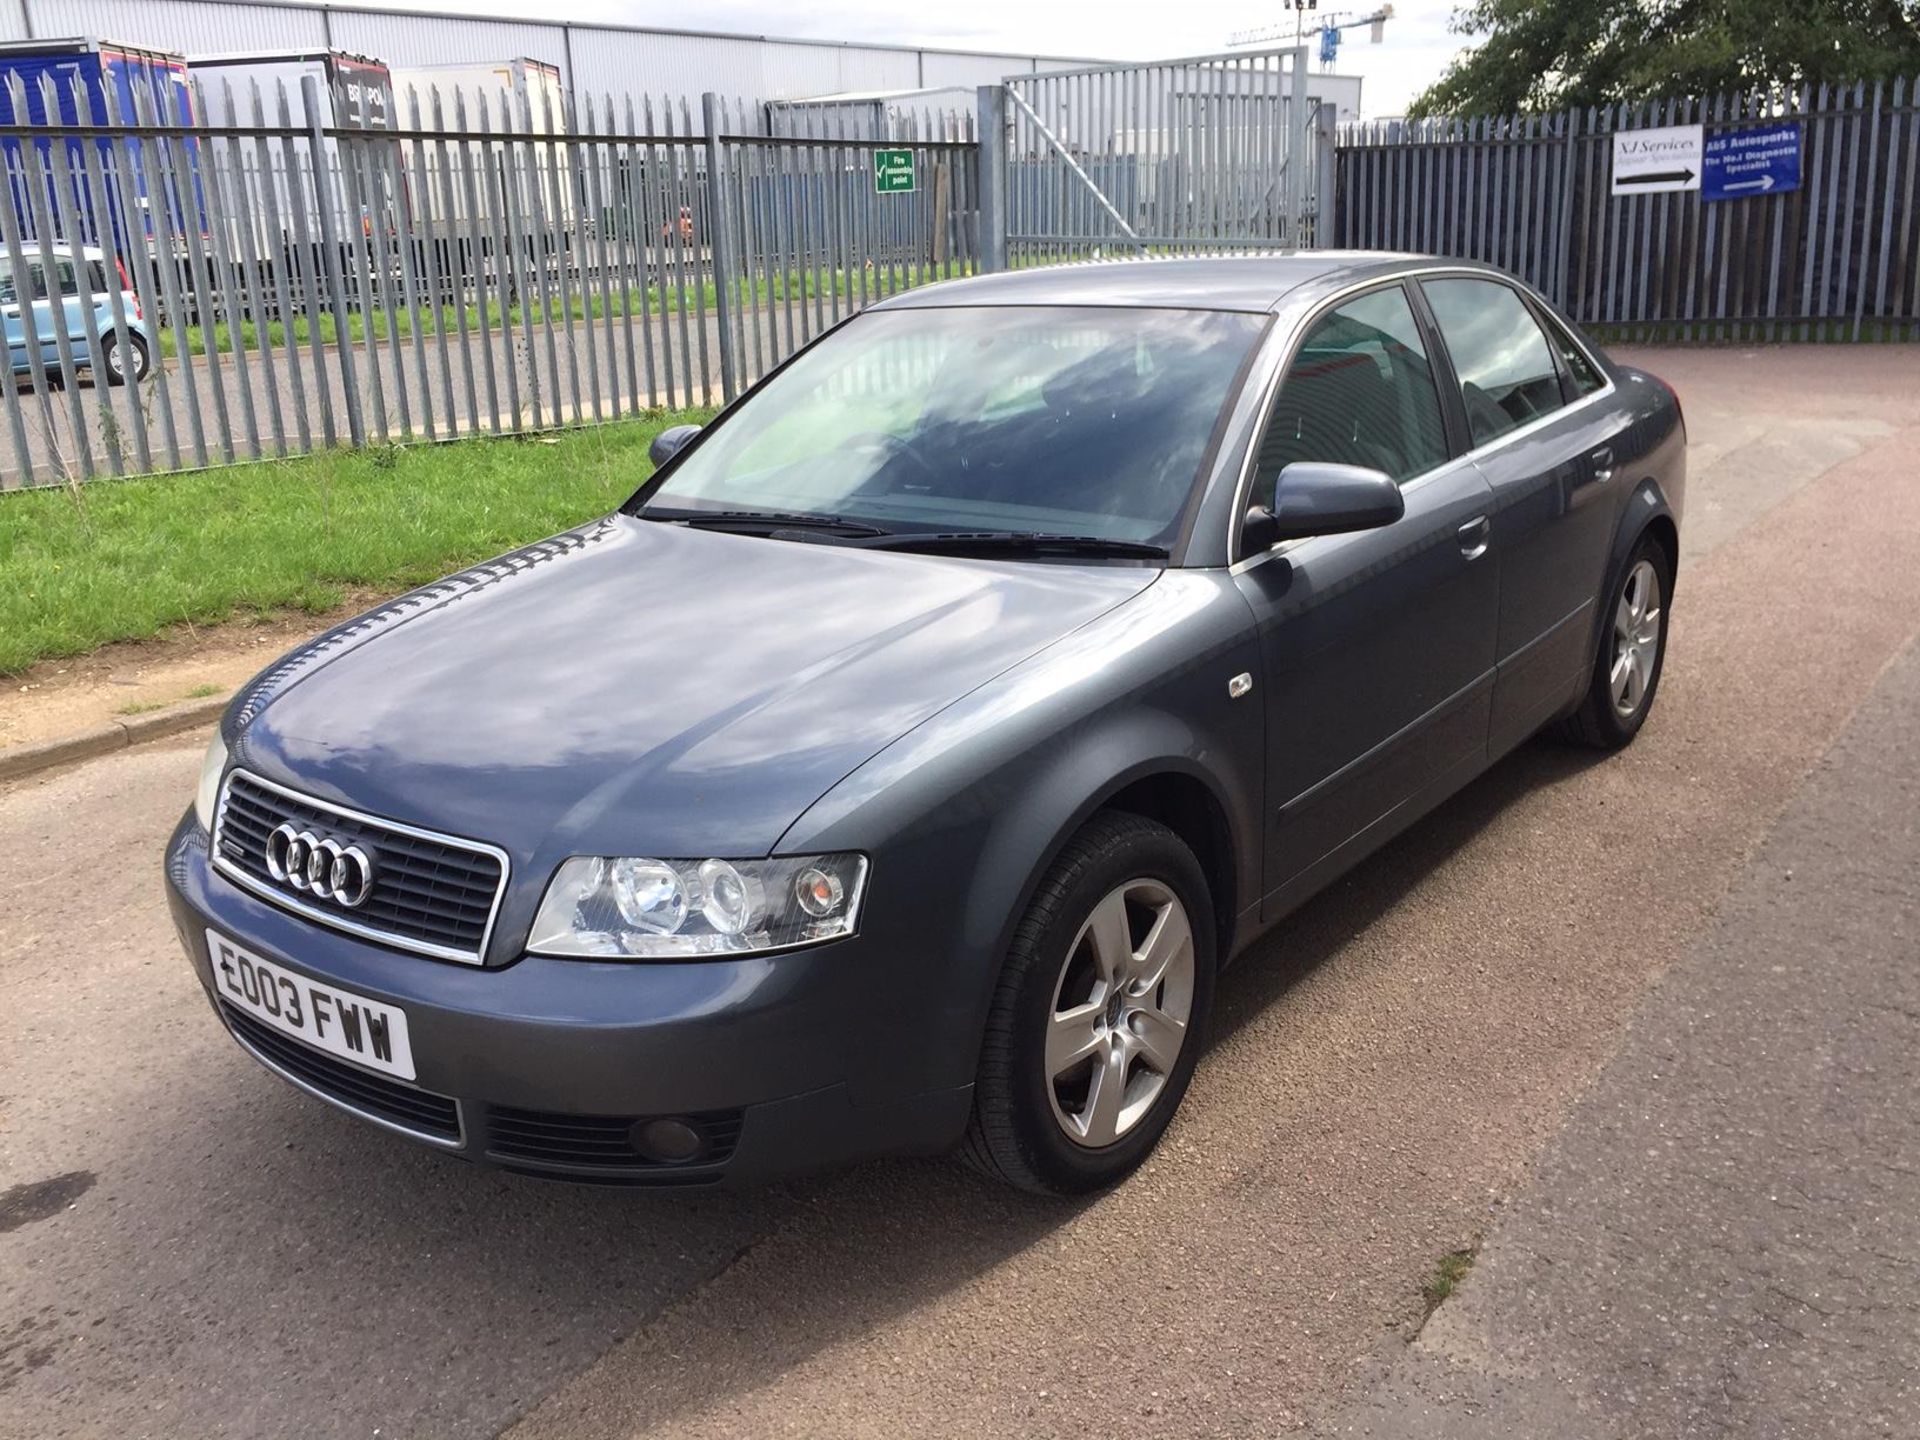 2003 Audi A4 Quattro 1.9 Tdi SE 4 Dr Saloon - CL505 - NO VAT ON THE HAMMER - Location: Corby, Northa - Image 15 of 15